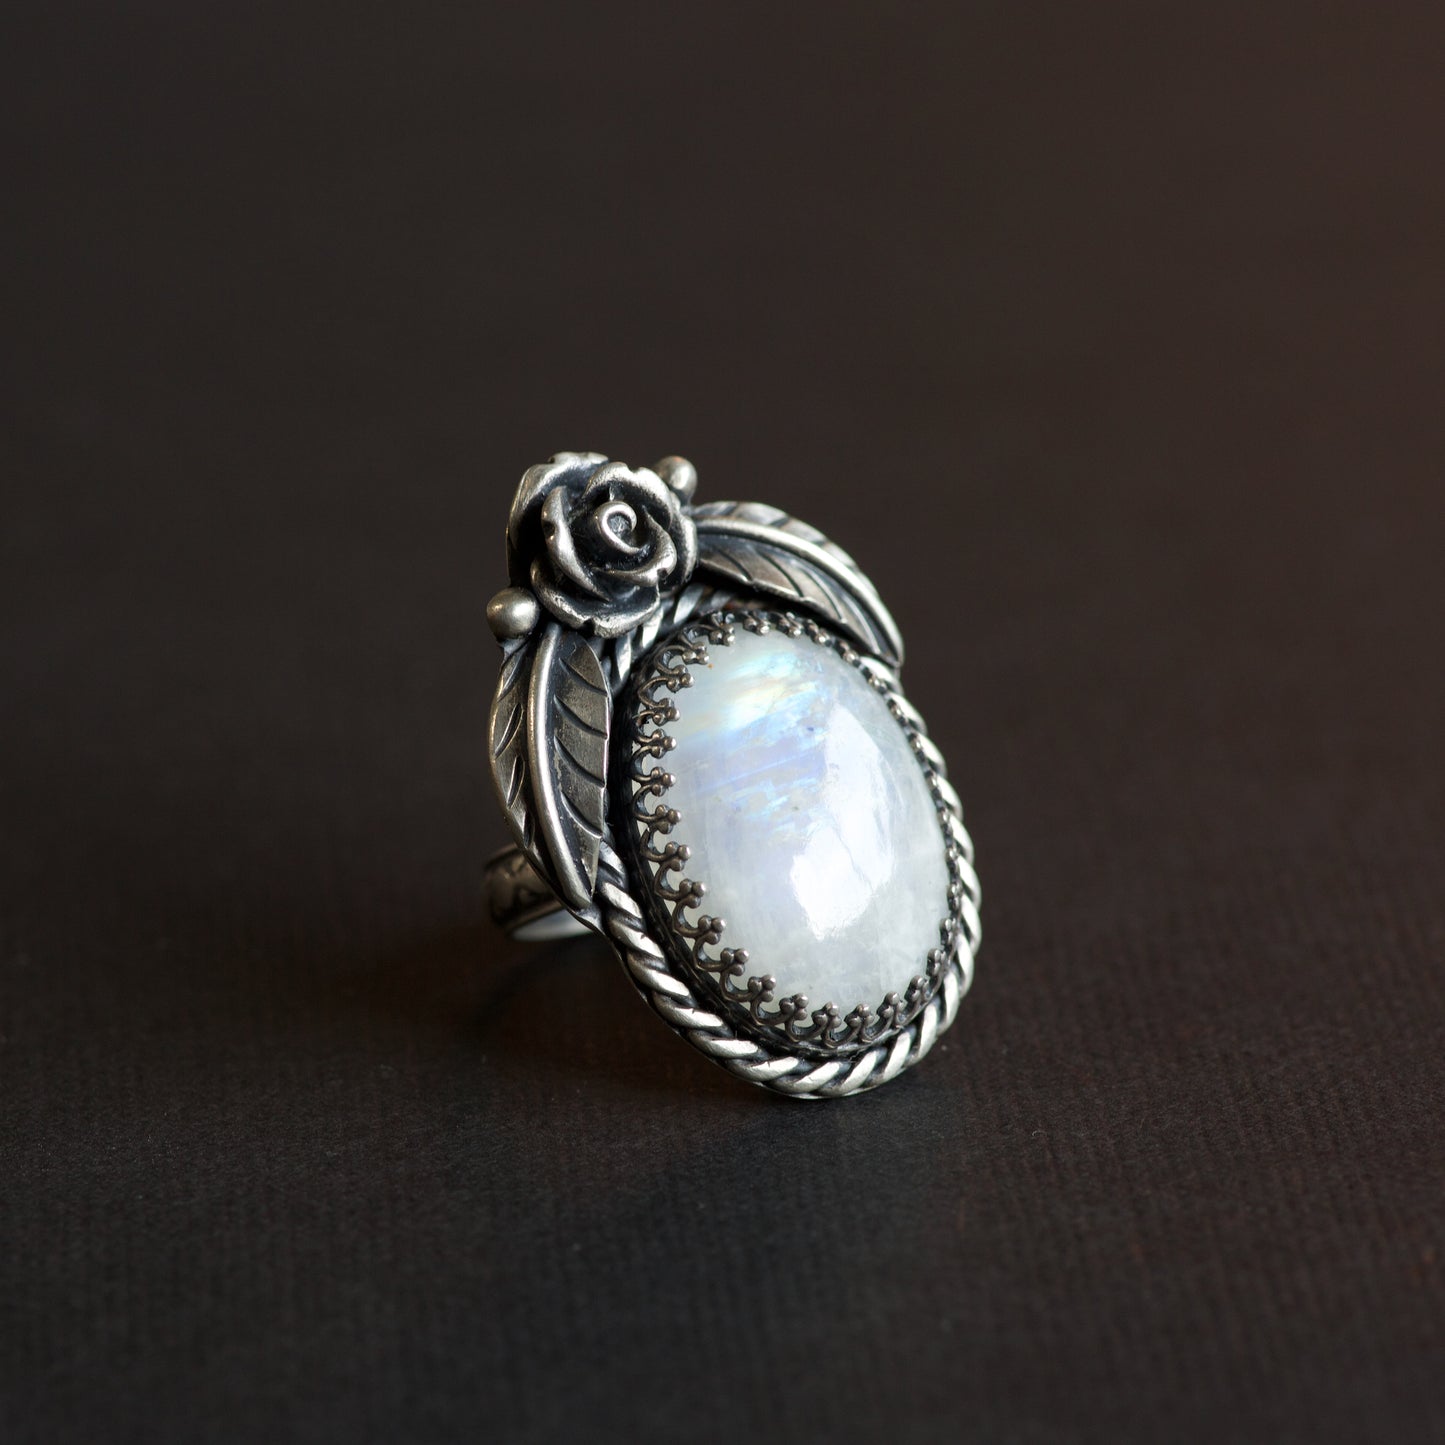 Rainbow Moonstone Rose Ring (Ria) Size: 8 or P 1/2